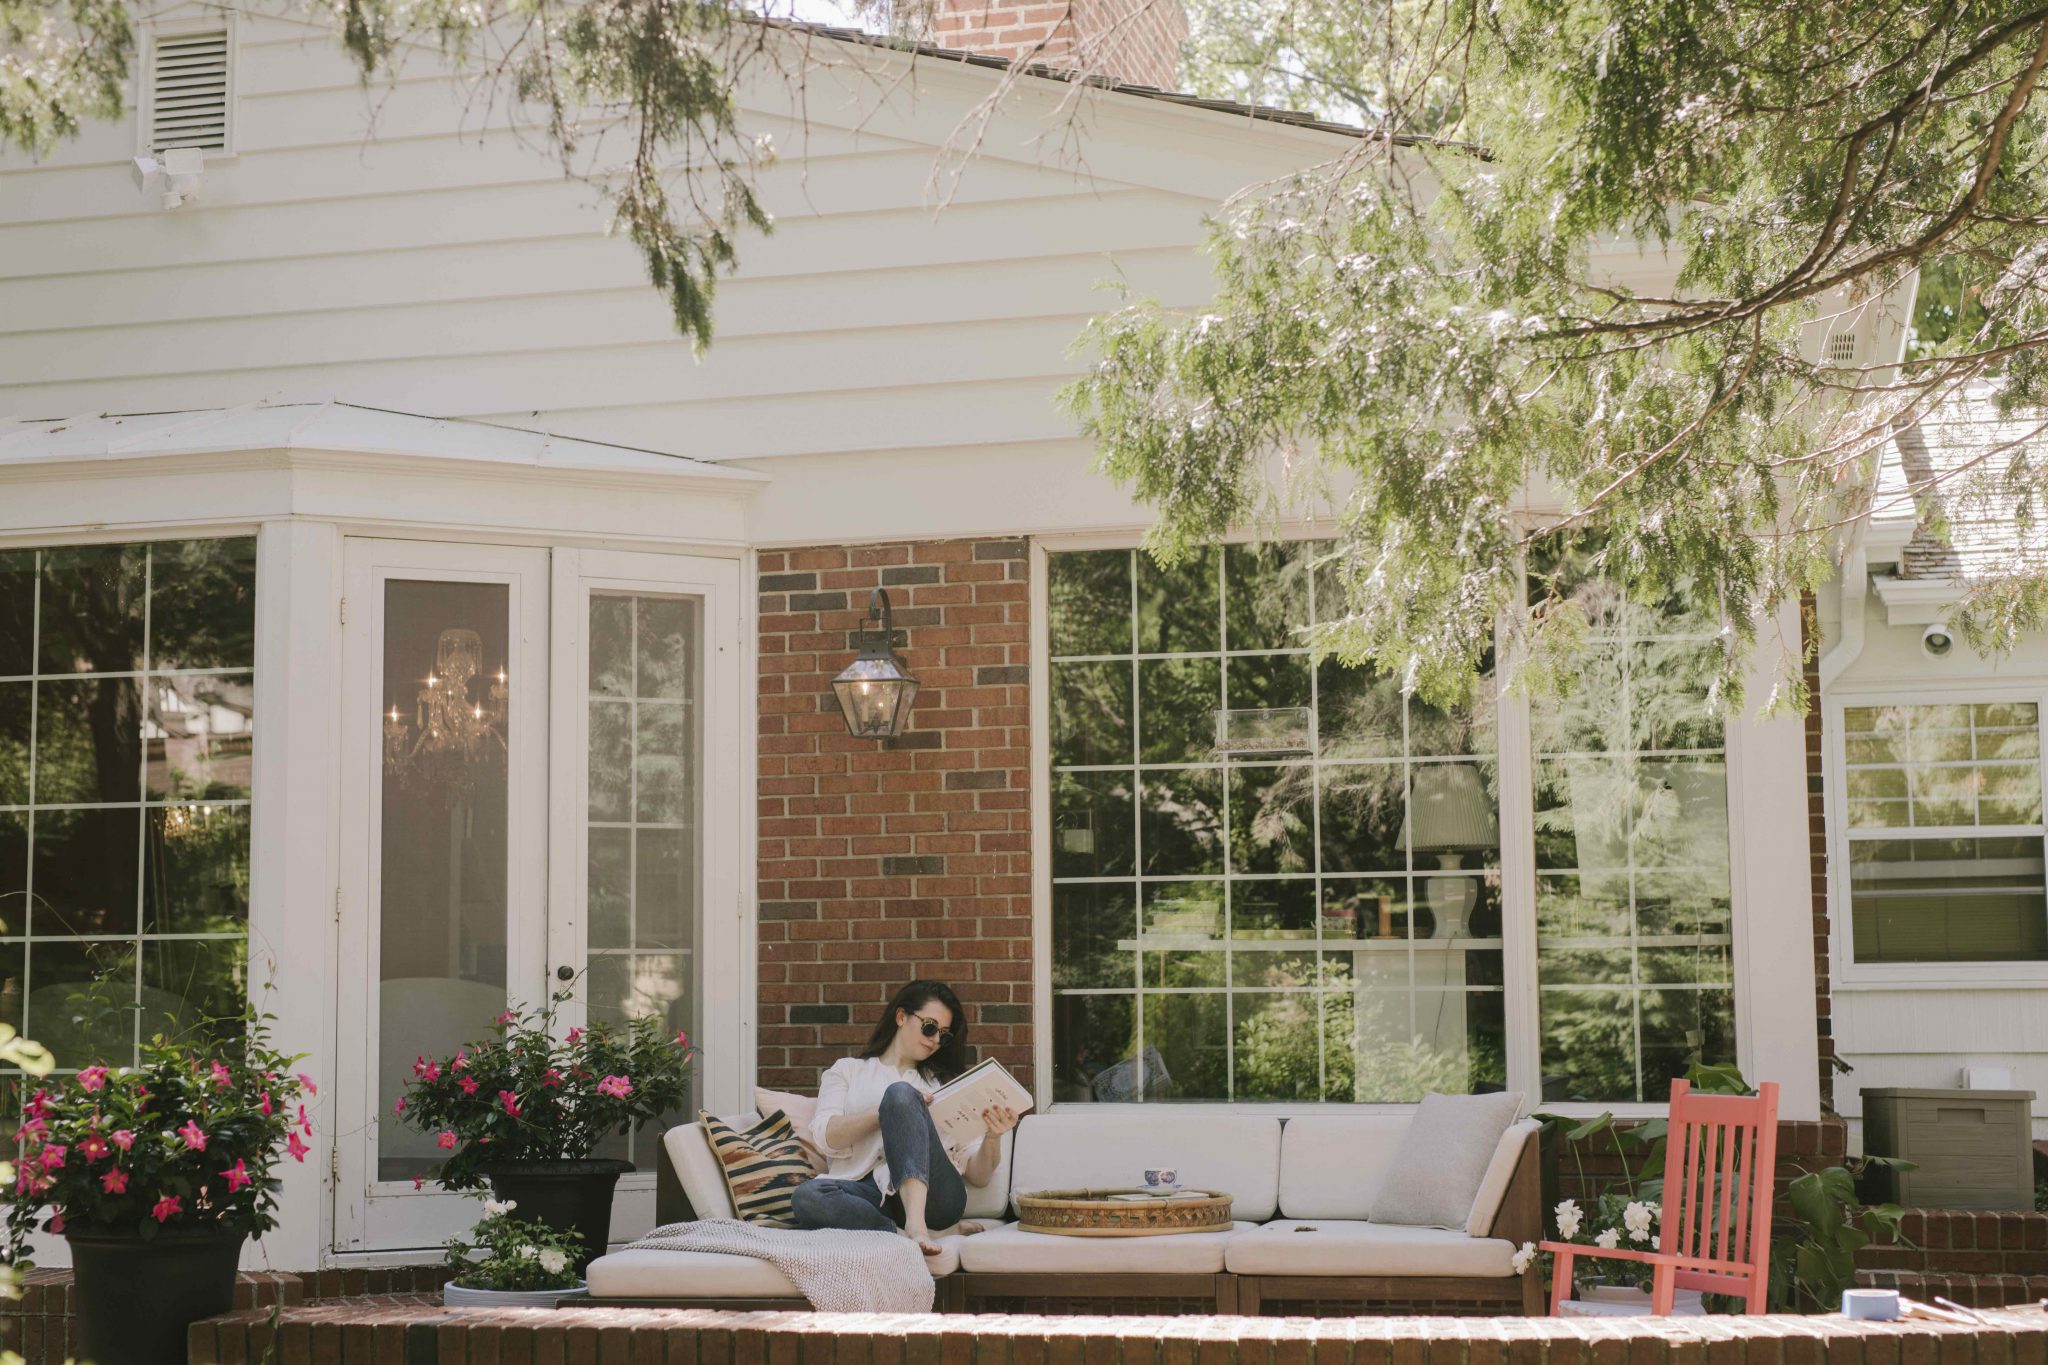 The Painting Project That Transformed My Backyard | Wit & Delight